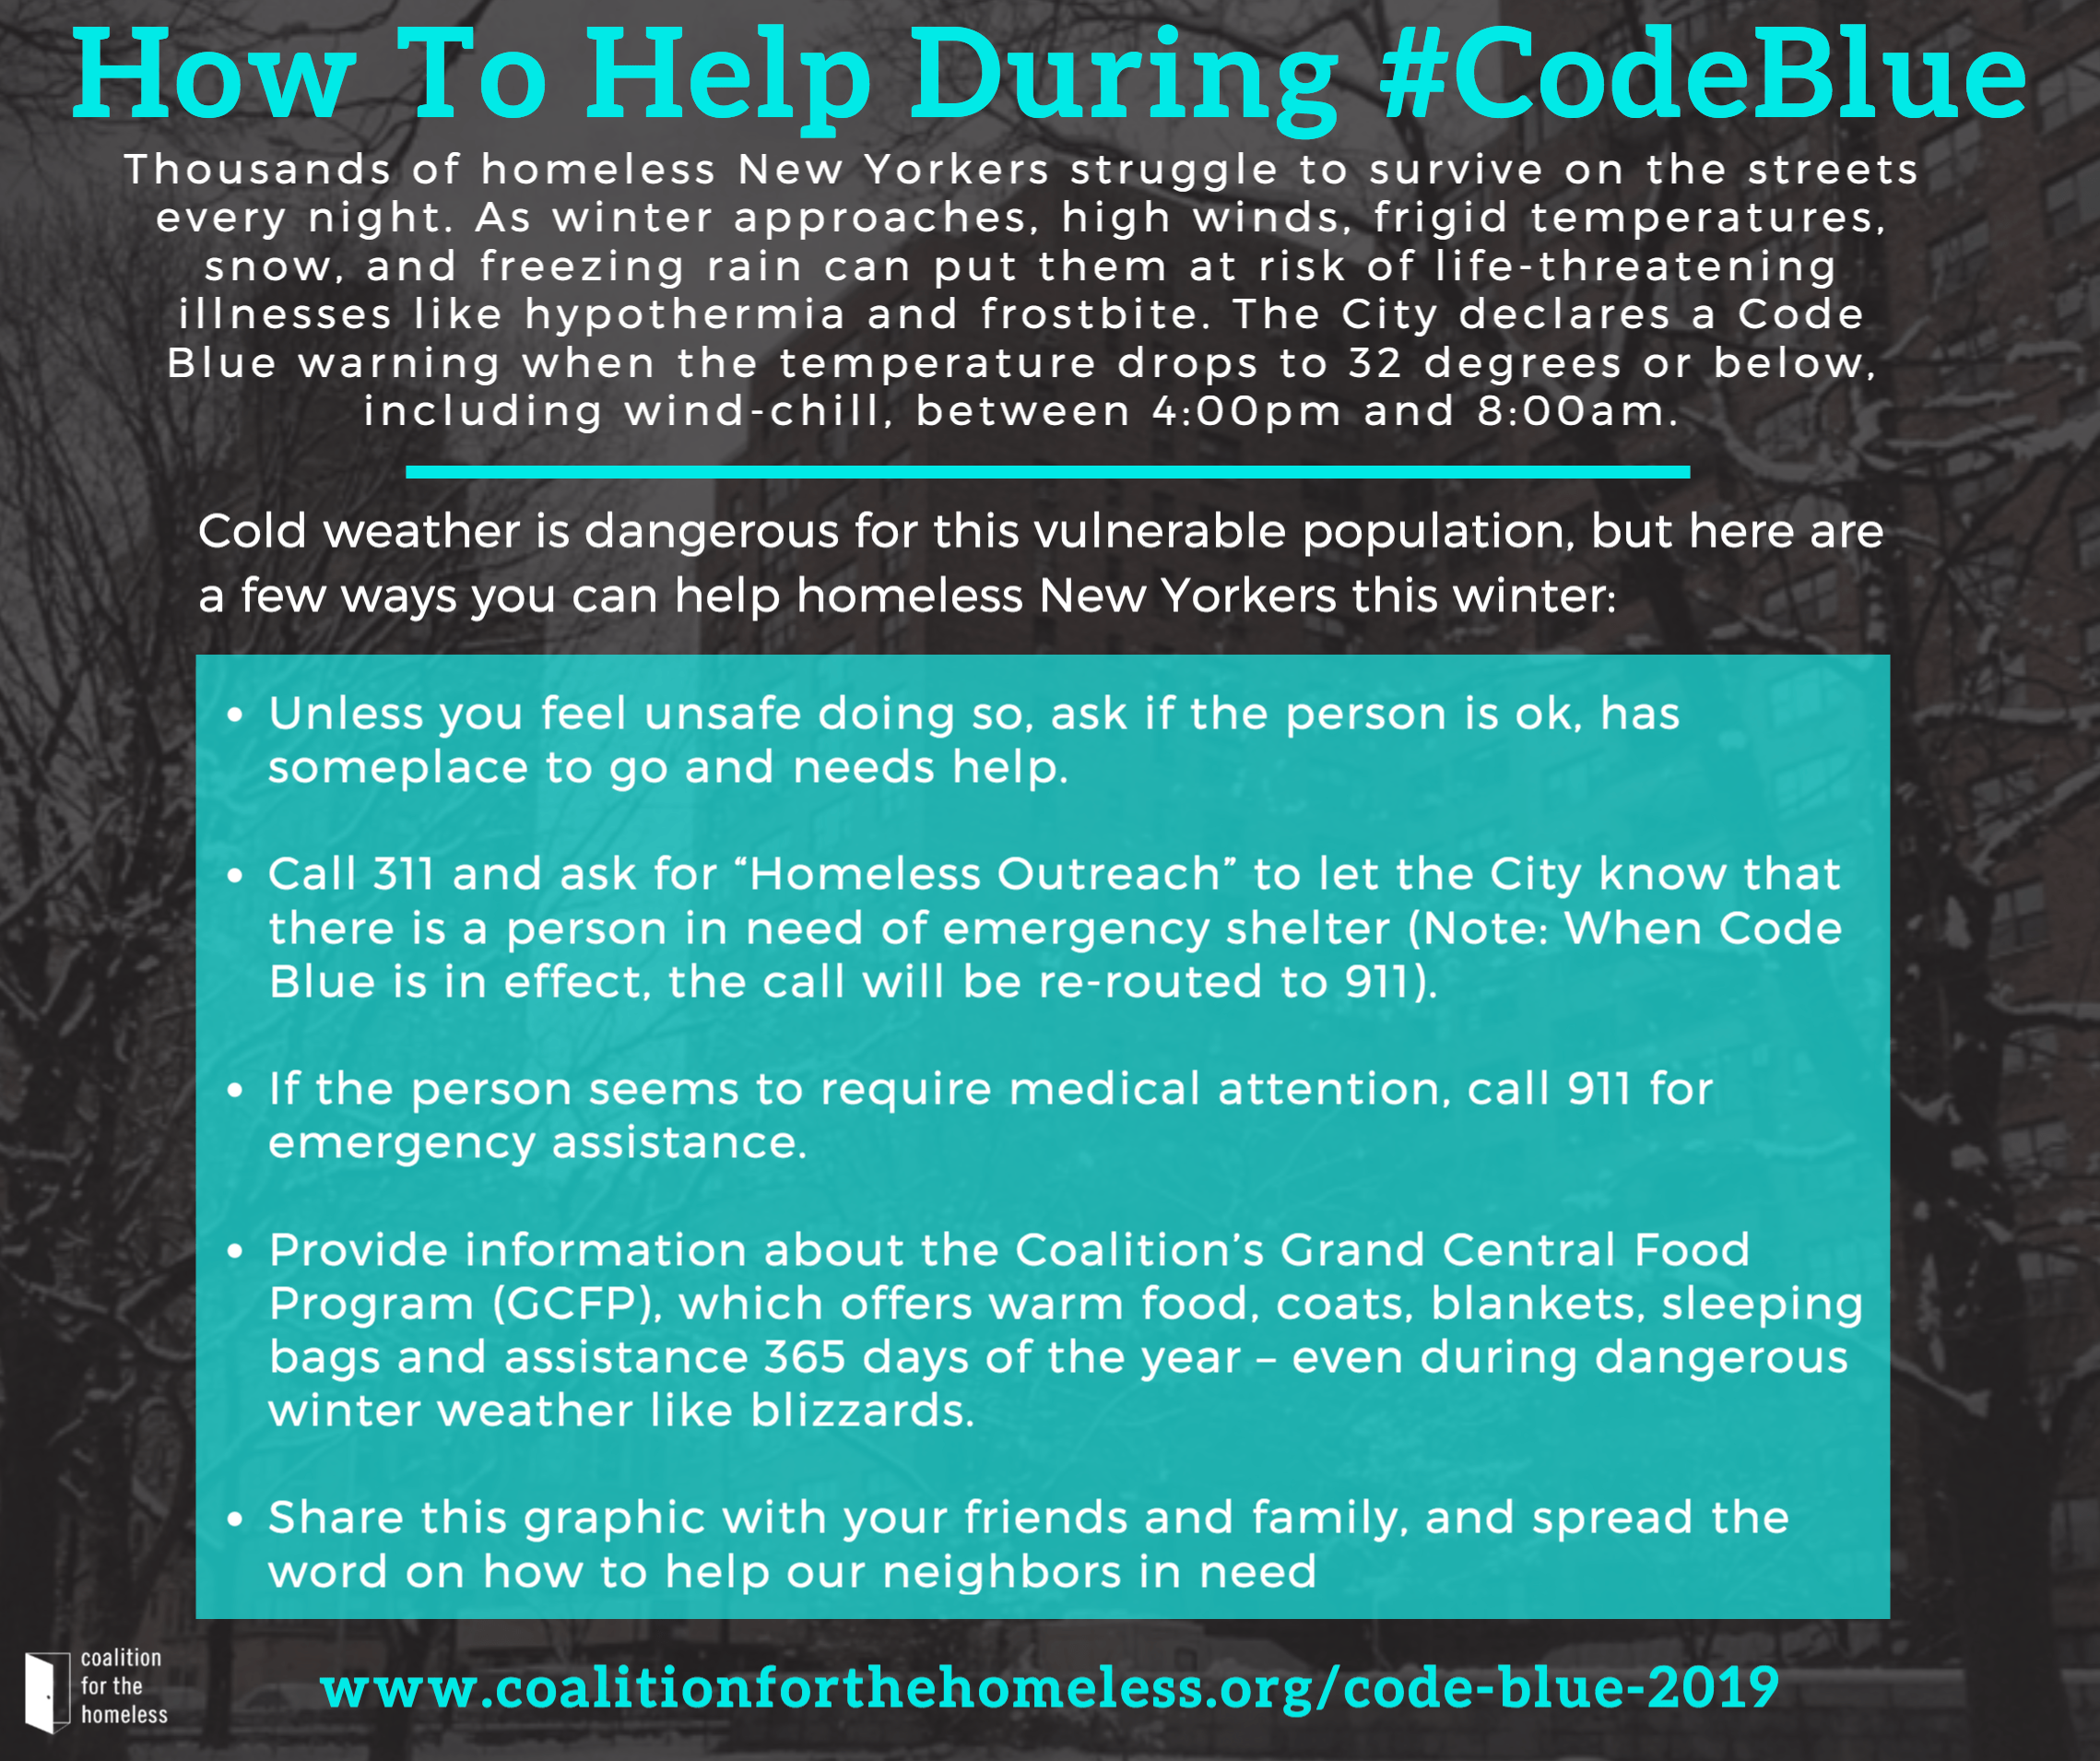 Cold weather is dangerous for this vulnerable population, but here are a few ways you can help homeless New Yorkers this winter: Unless you feel unsafe doing so, ask if the person is ok, has someplace to go and needs help. Call 311 and ask for “Homeless Outreach” to let the City know that there is a person in need of emergency shelter (Note: When Code Blue is in effect, the call will be re-routed to 911). If the person seems to require medical attention, call 911 for emergency assistance. Provide information about the Coalition’s Grand Central Food Program (GCFP), which offers warm food, coats, blankets, sleeping bags, and assistance 365 days of the year – even during dangerous winter weather like blizzards. Click here for a list of stops. Share this graphic with your friends and family, and spread the word on how to help our neighbors in need: